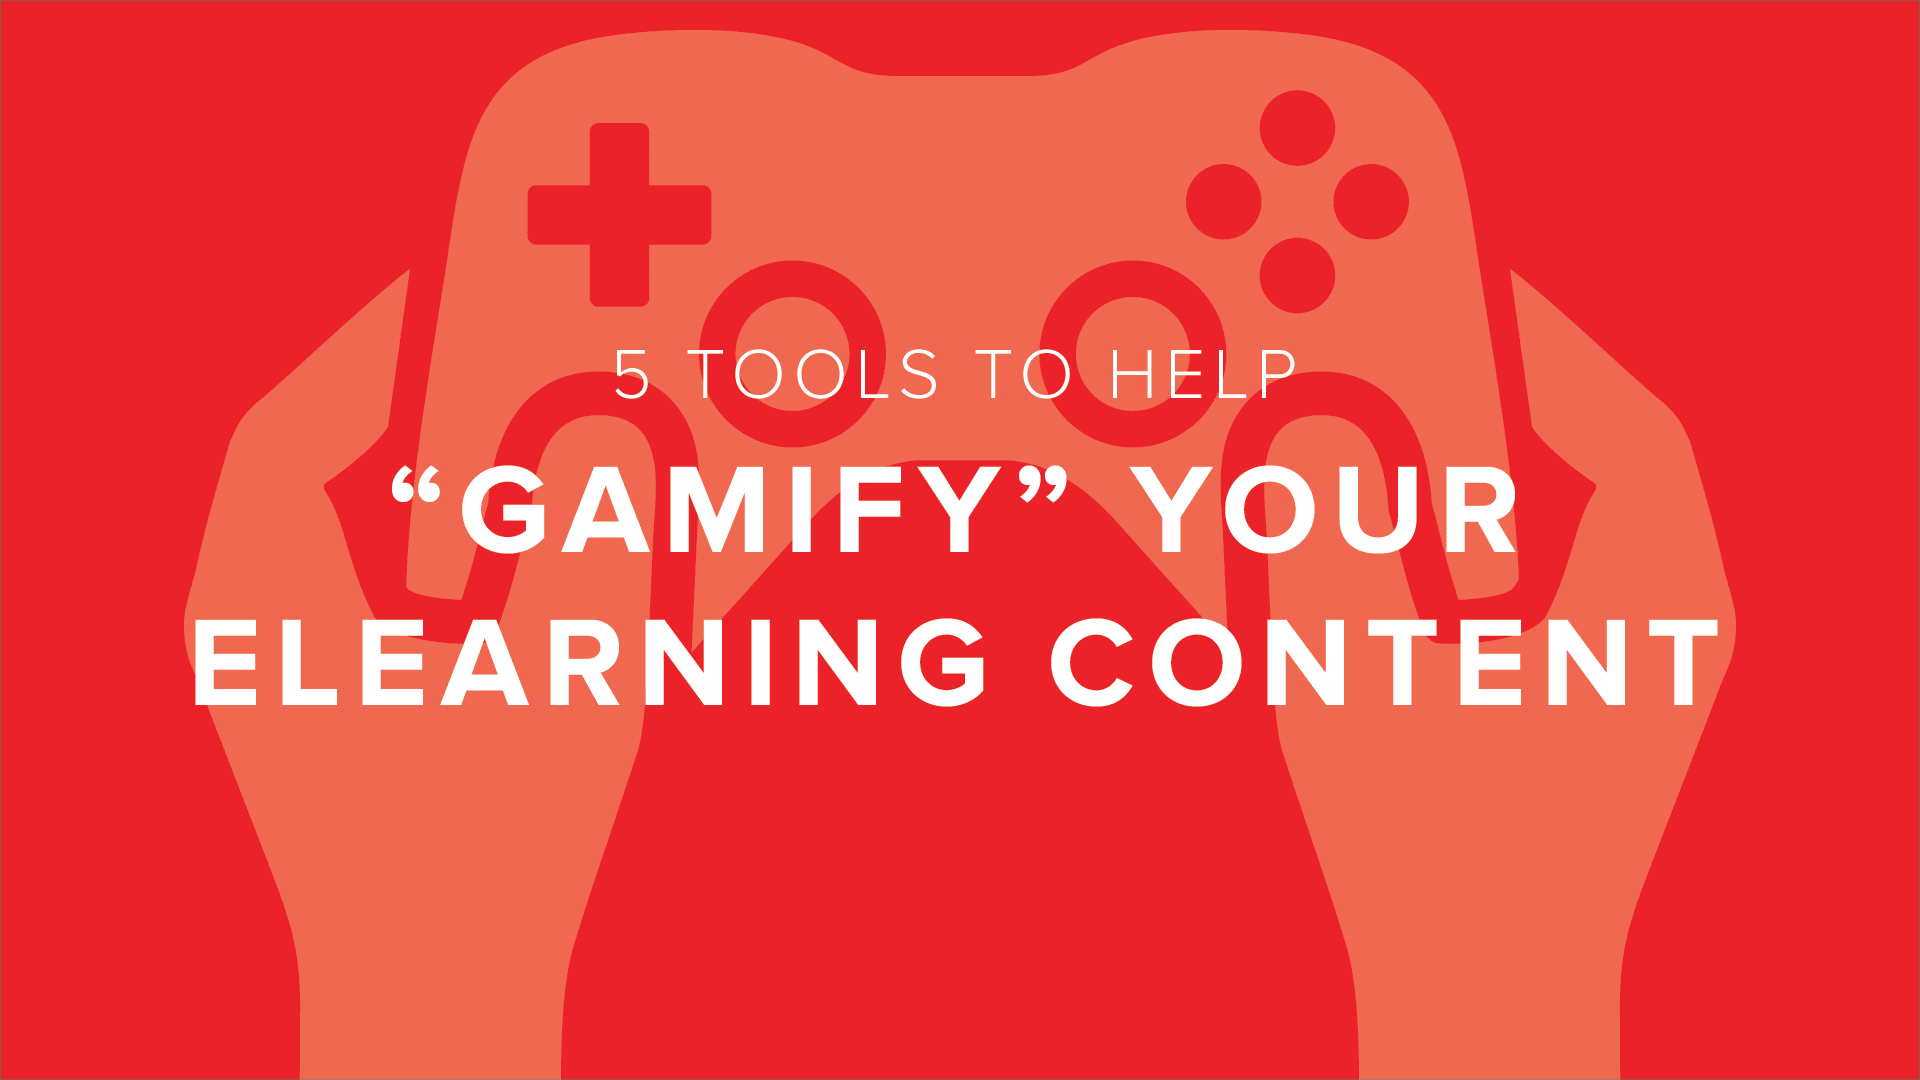 DigitalChak: 5 Tools to Help You "Gamify" Your eLearning Content